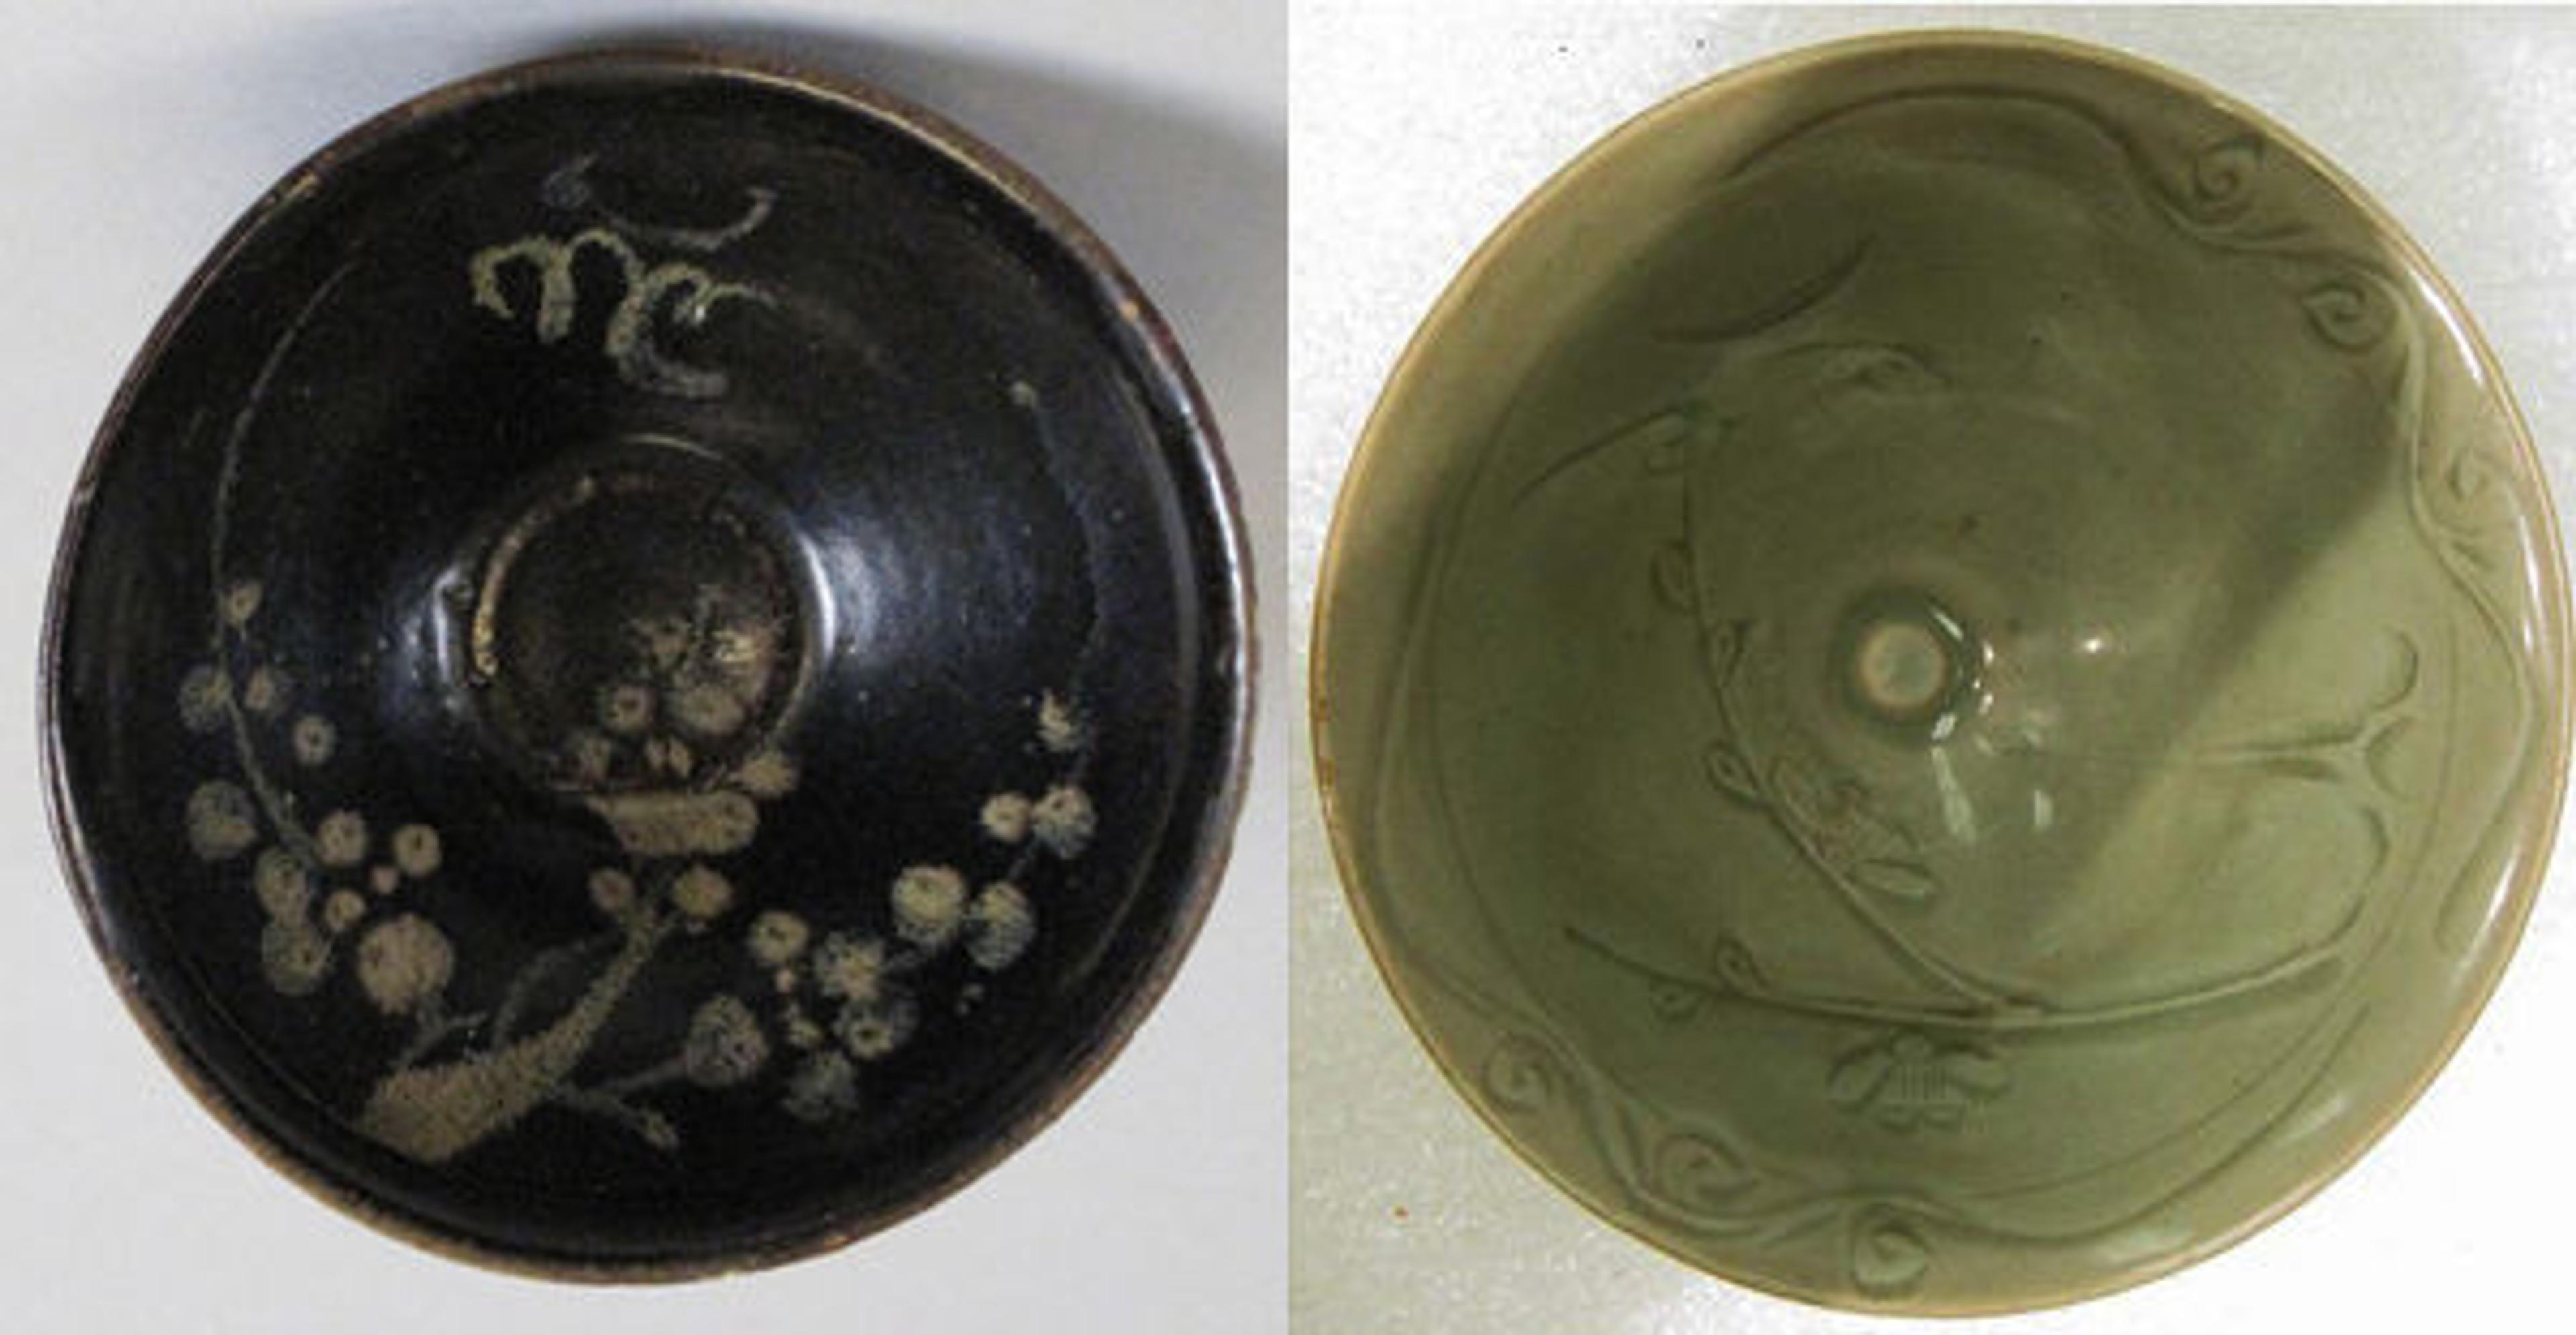 Left: Tea Bowl with Crescent Moon, Clouds, and Blossoming Plum; Right: Bowl with Plum Blossom and Crescent Moon